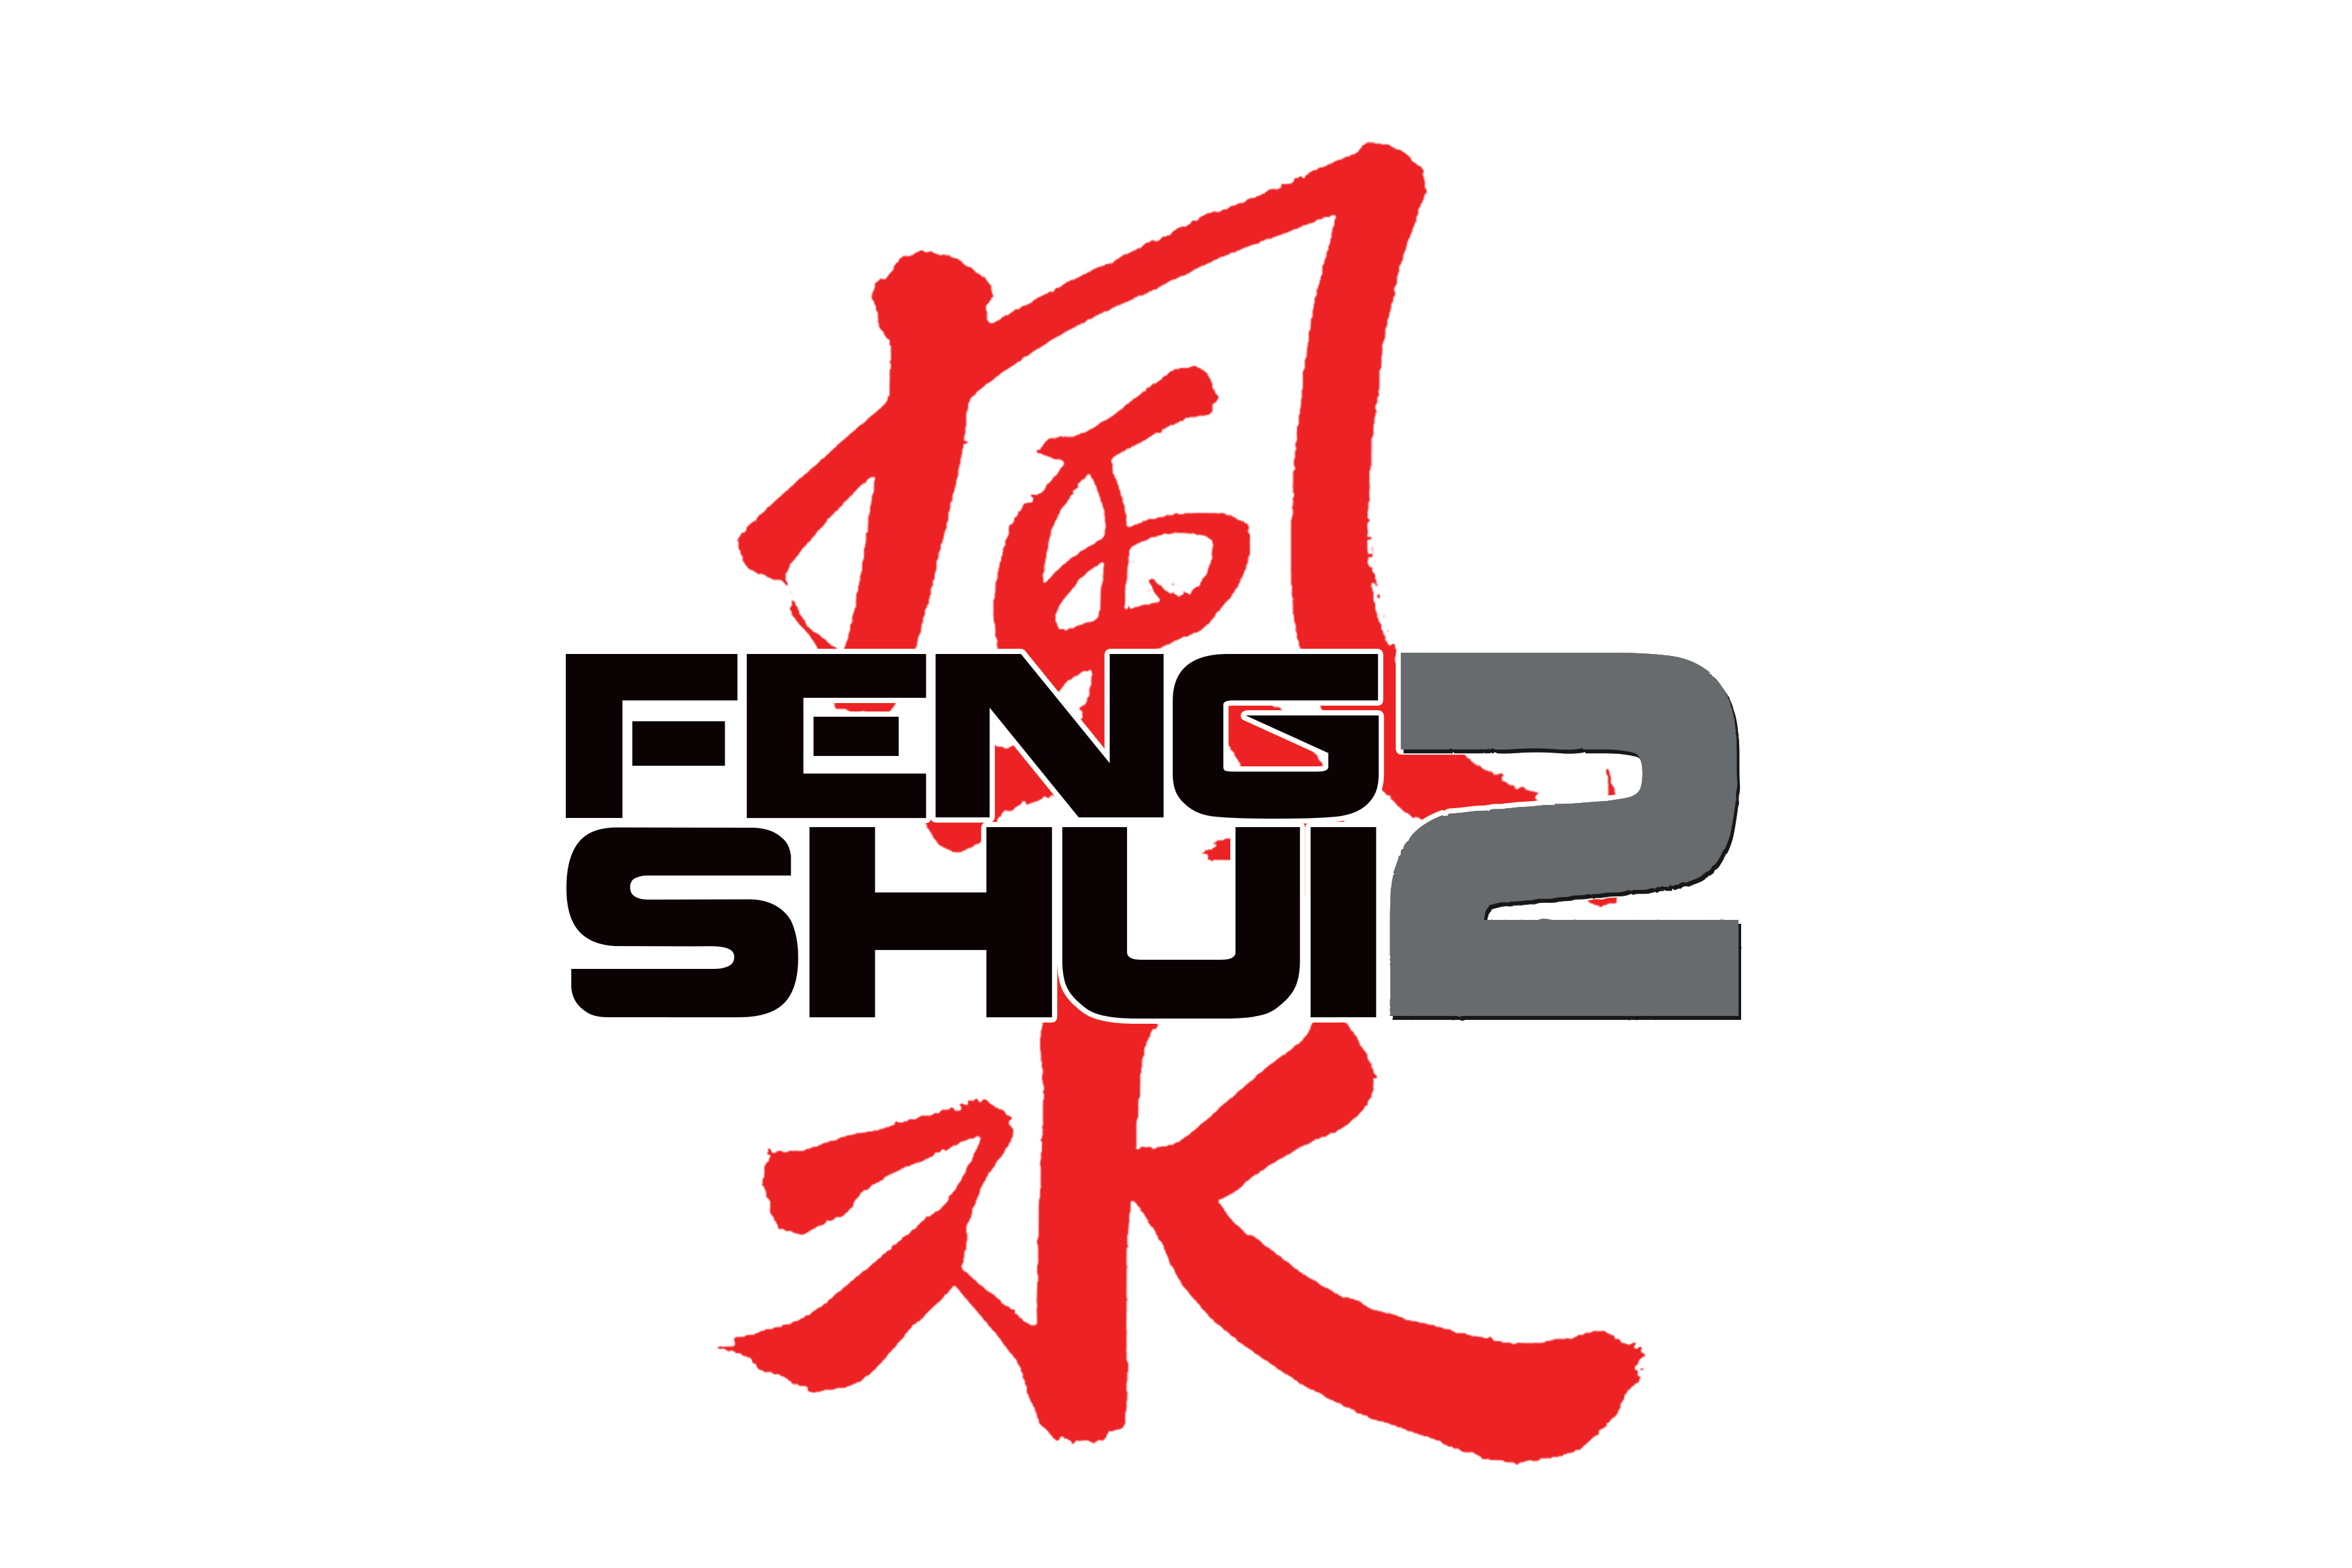 Feng Shui (Second Edition) - Bards & Cards